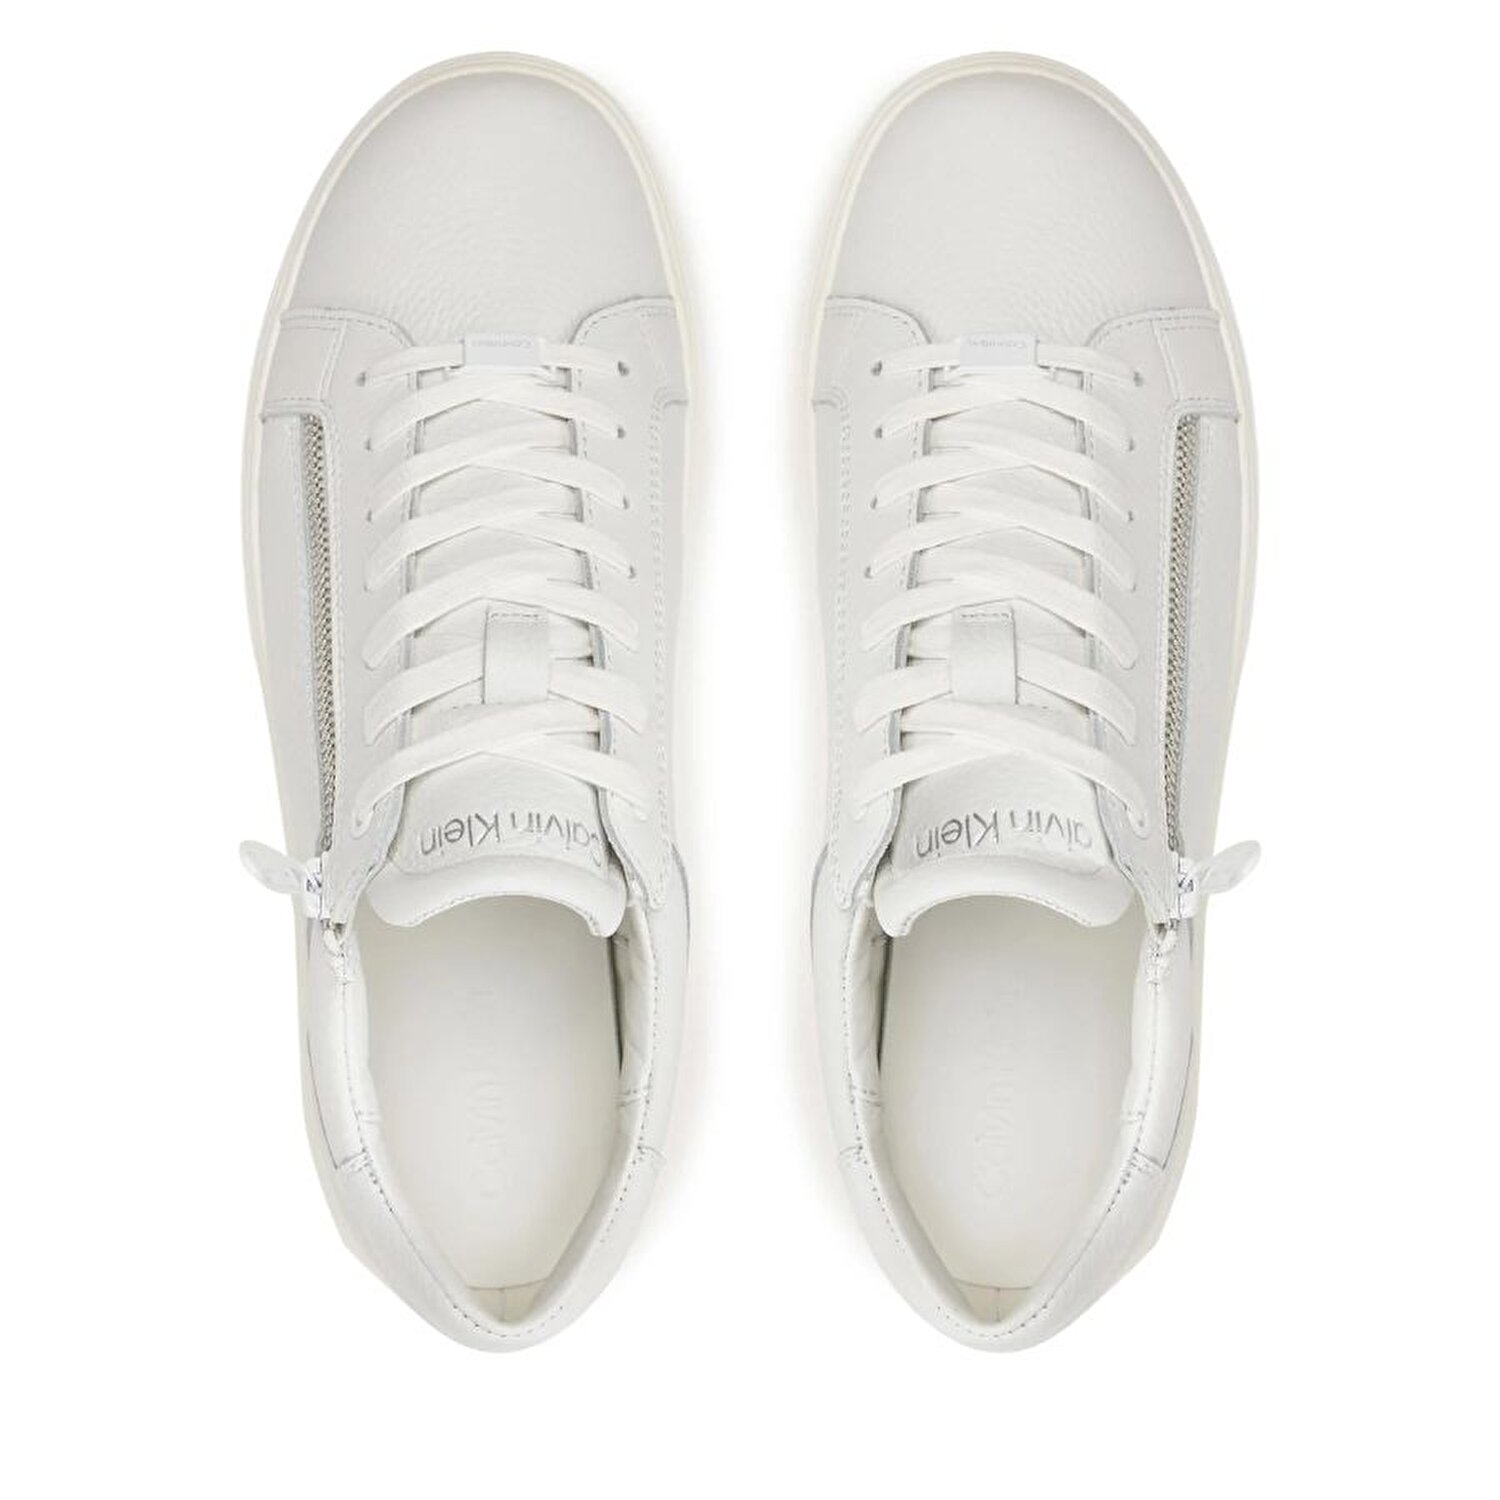 LOW TOP LACE UP W/ZIP